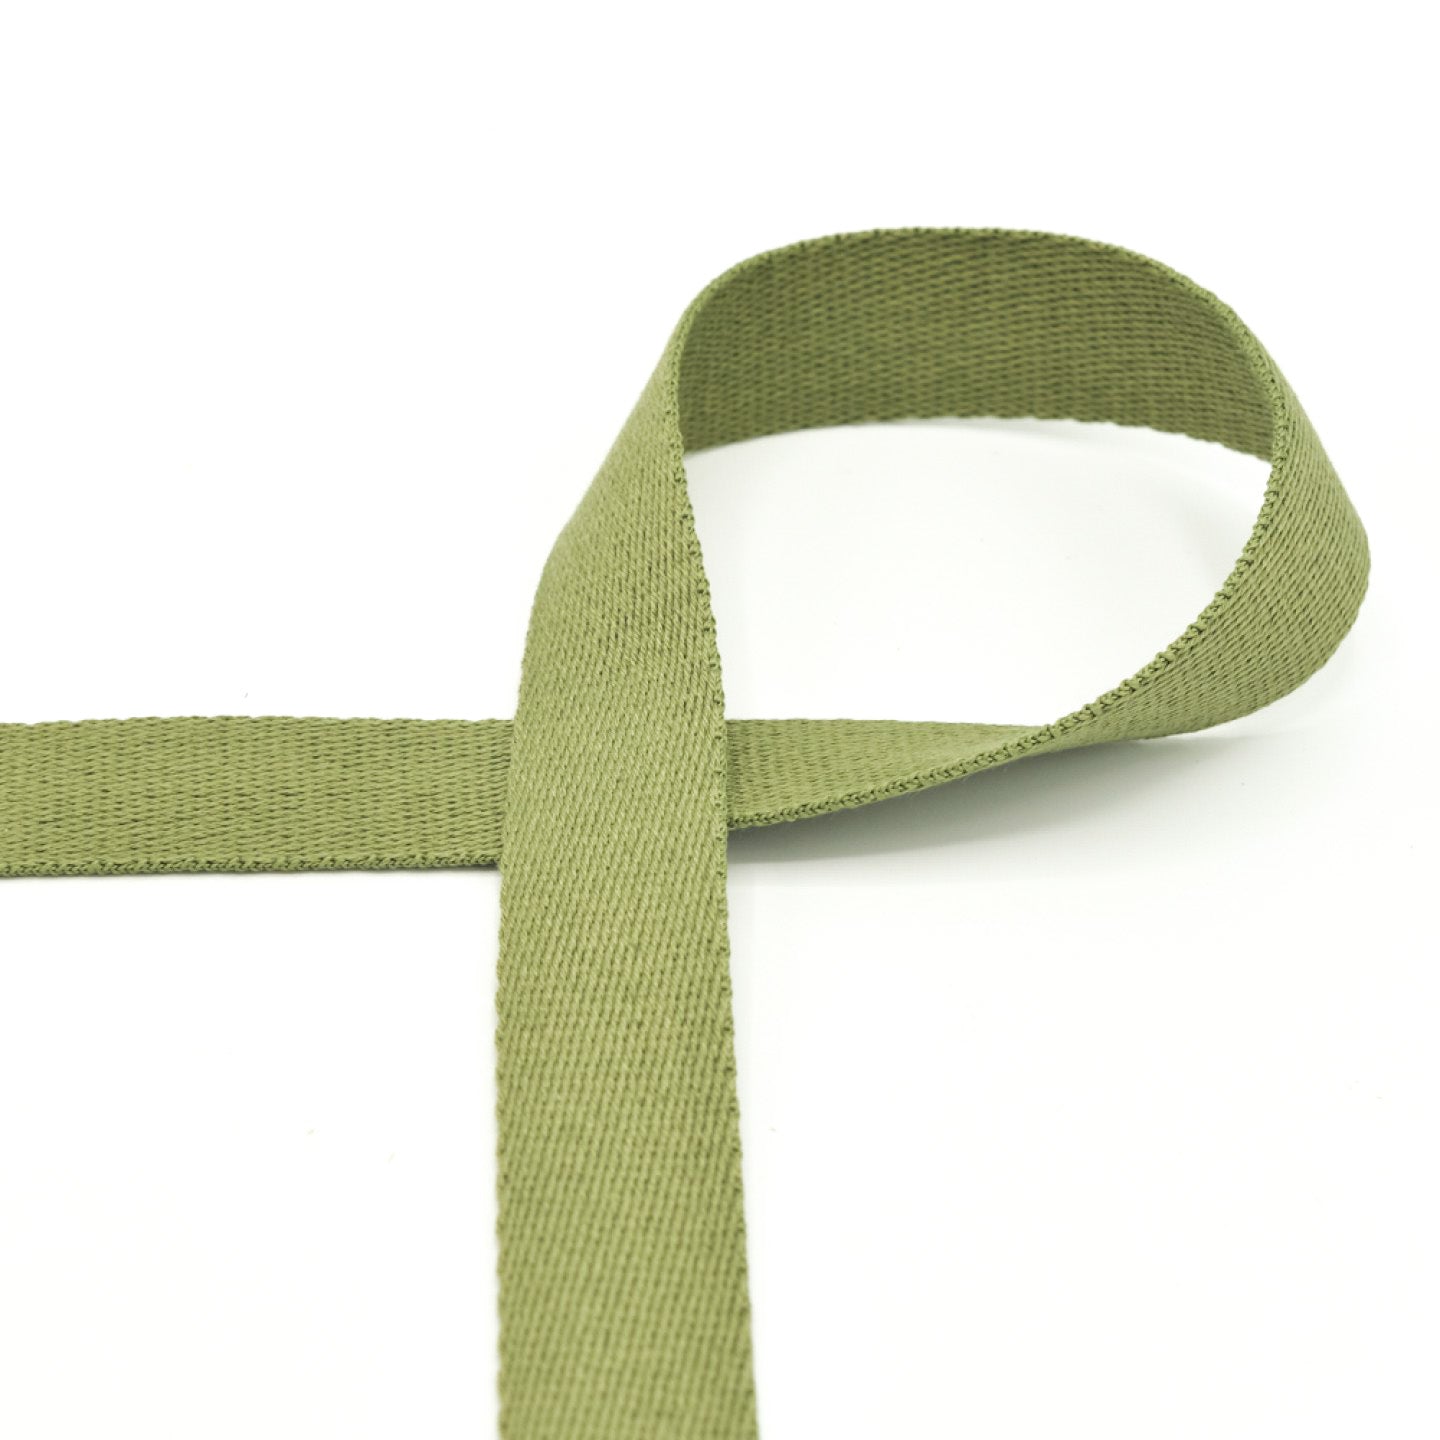 25 mm strap - Olive grove